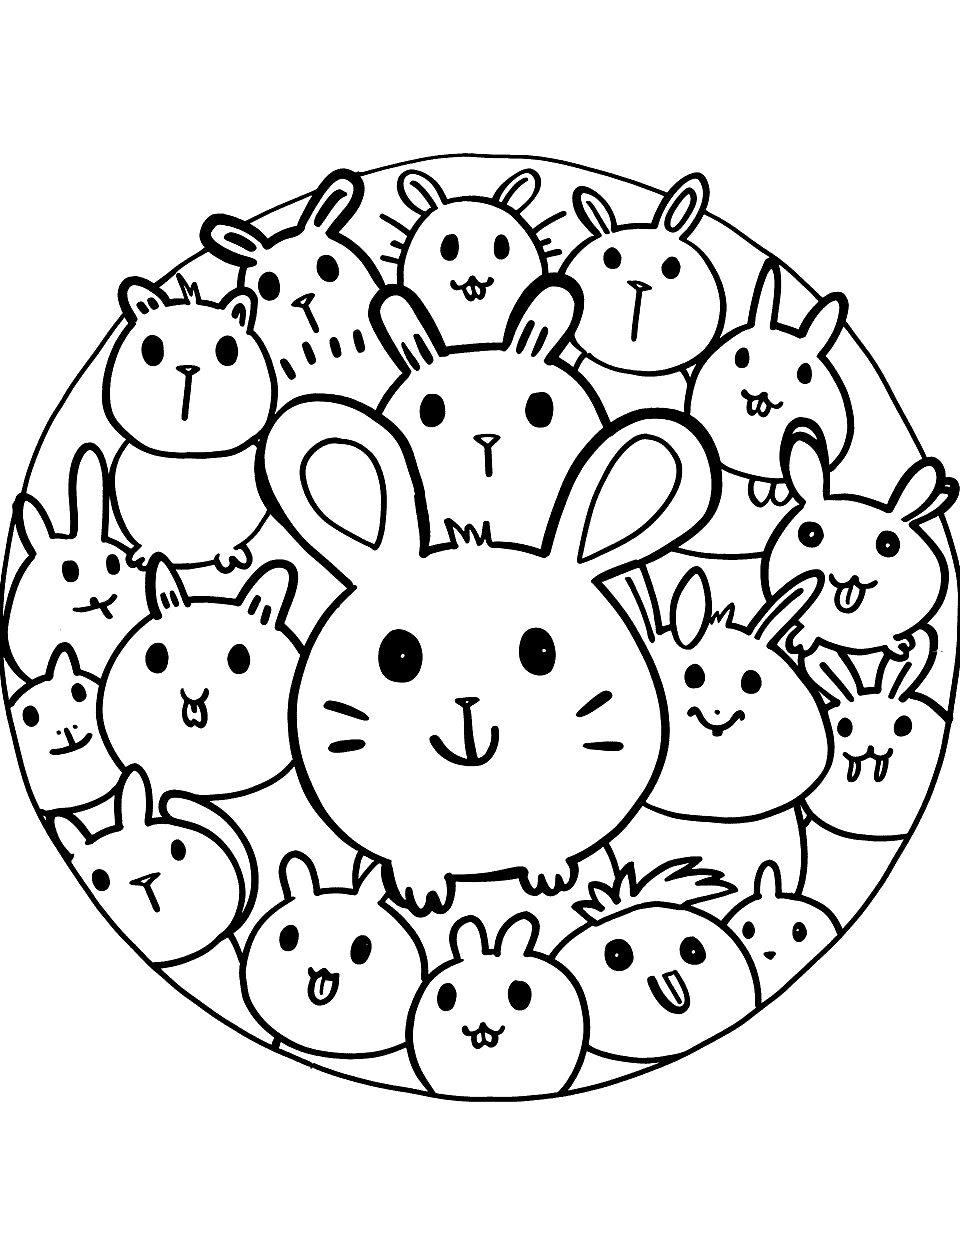 Cute Critters and Circles Shapes Coloring Page - Various small animals like rabbits and hamsters peeking out of circles.